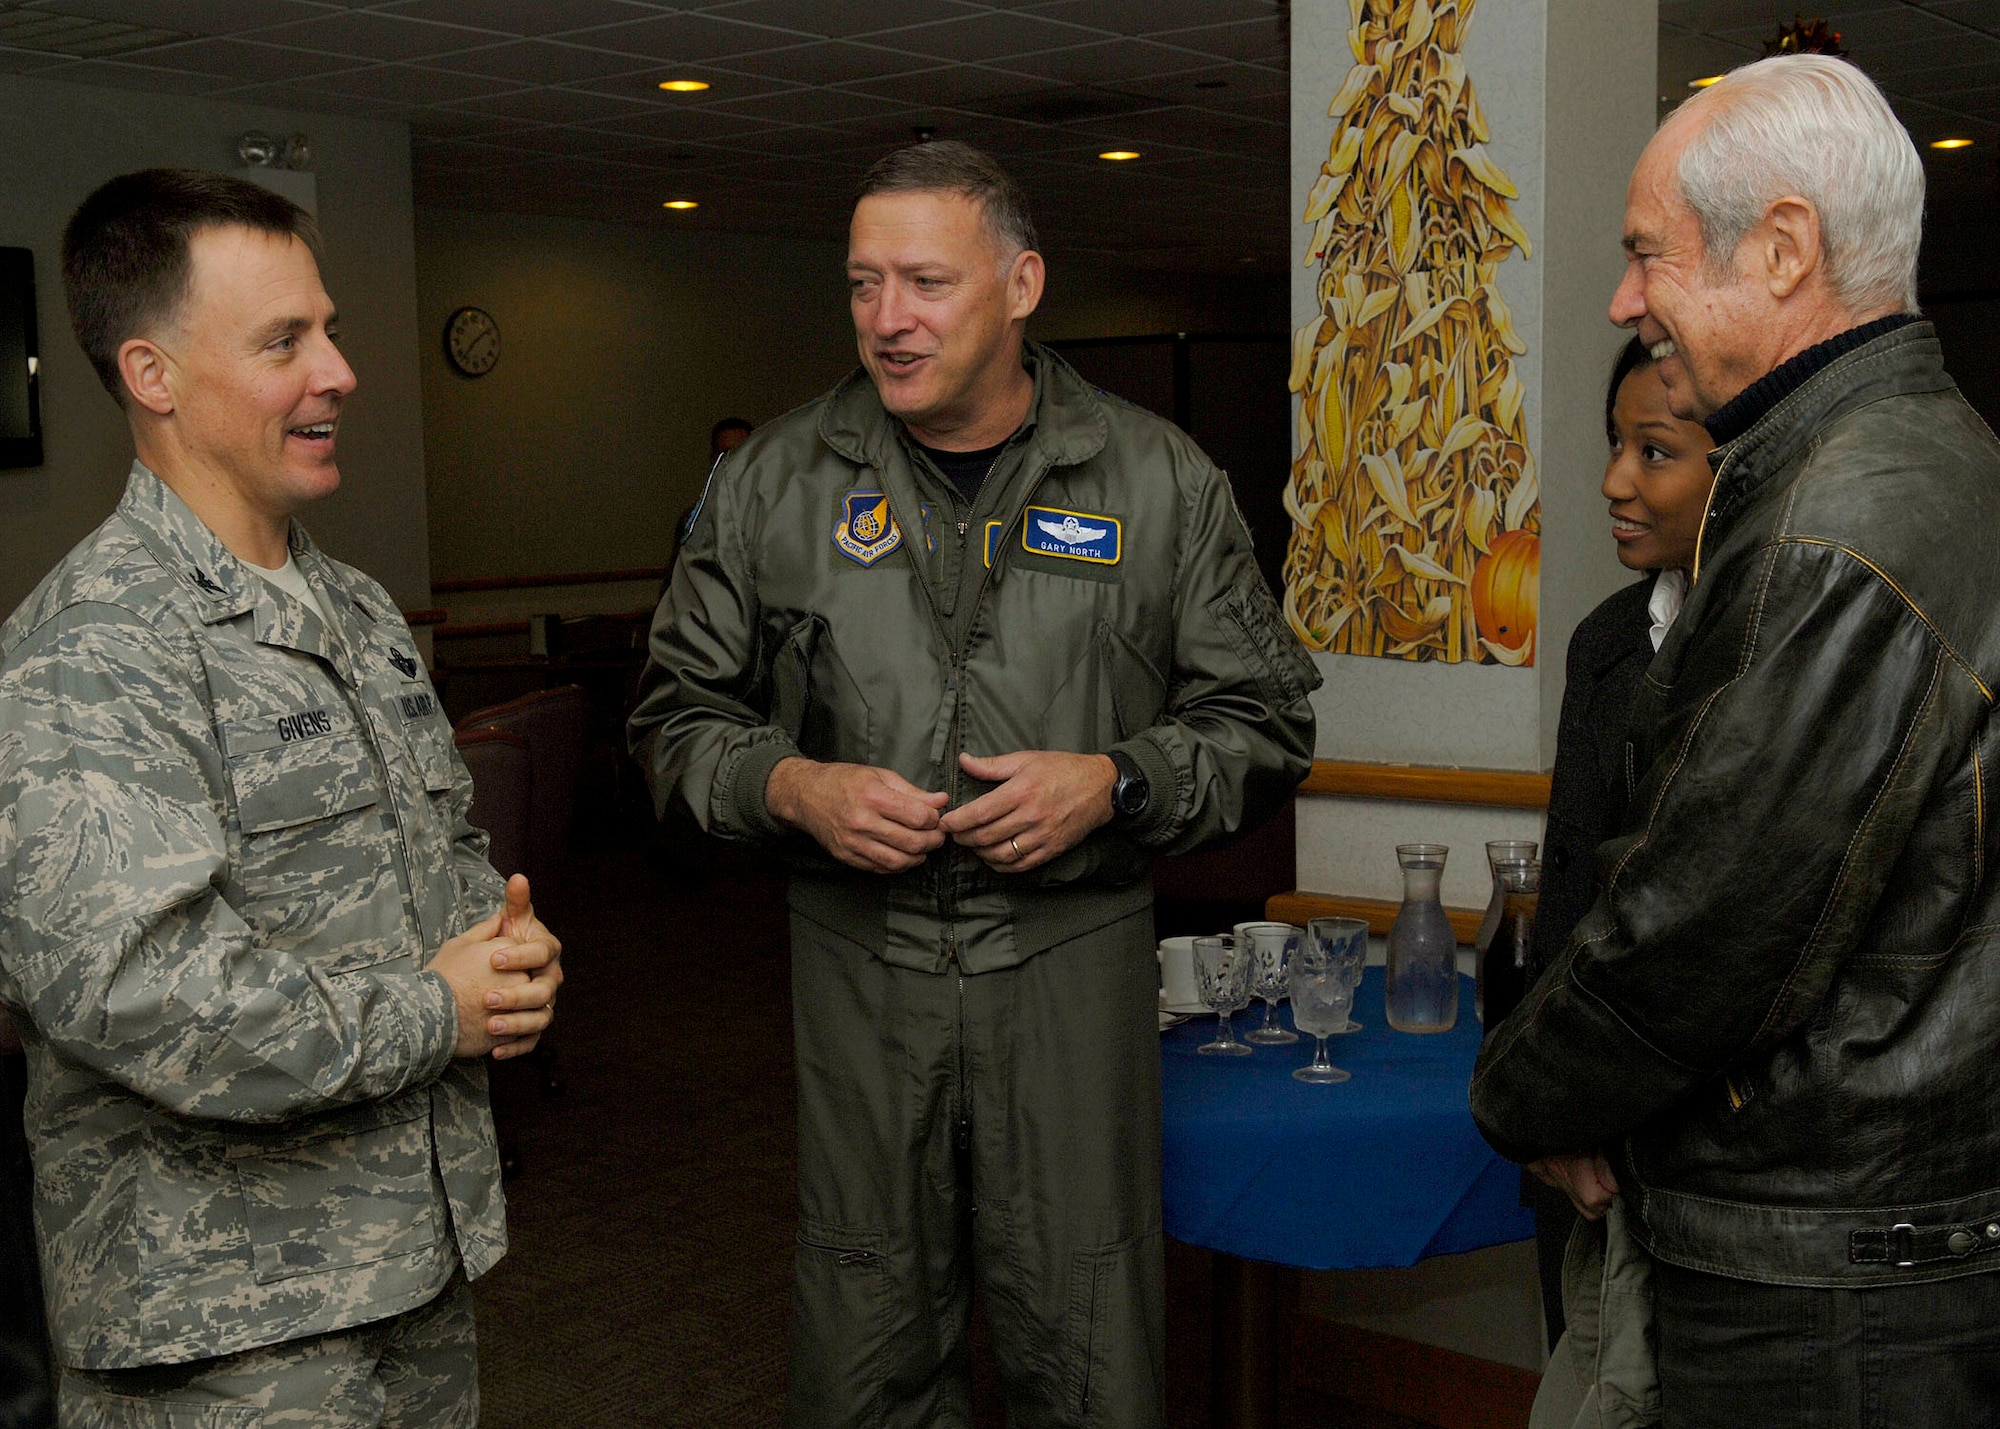 Col. Robert Givens, 8th Fighter Wing commander, Kunsan Air Base, Republic of Korea, chats with Gen. Gary North, Pacific Air Forces commander, Lena Lopez, chief community relations at PACAF, and Les Enderton, Executive Director of the Oahu Visitors Bureau at the O’Malley Dining Facility Nov.23.  General North is sponsoring four civic leaders from the Air Force Civilian Advisory Council as they tour Kunsan and Osan Air Bases, ROK, Nov. 21-23.  The purpose of the trip is for General North to celebrate Thanksgiving with the Airmen while the civic leaders get a better understanding of life for Airmen assigned to the ROK. (U.S. Air Force photo/Tech. Sgt. Jerome S. Tayborn)  